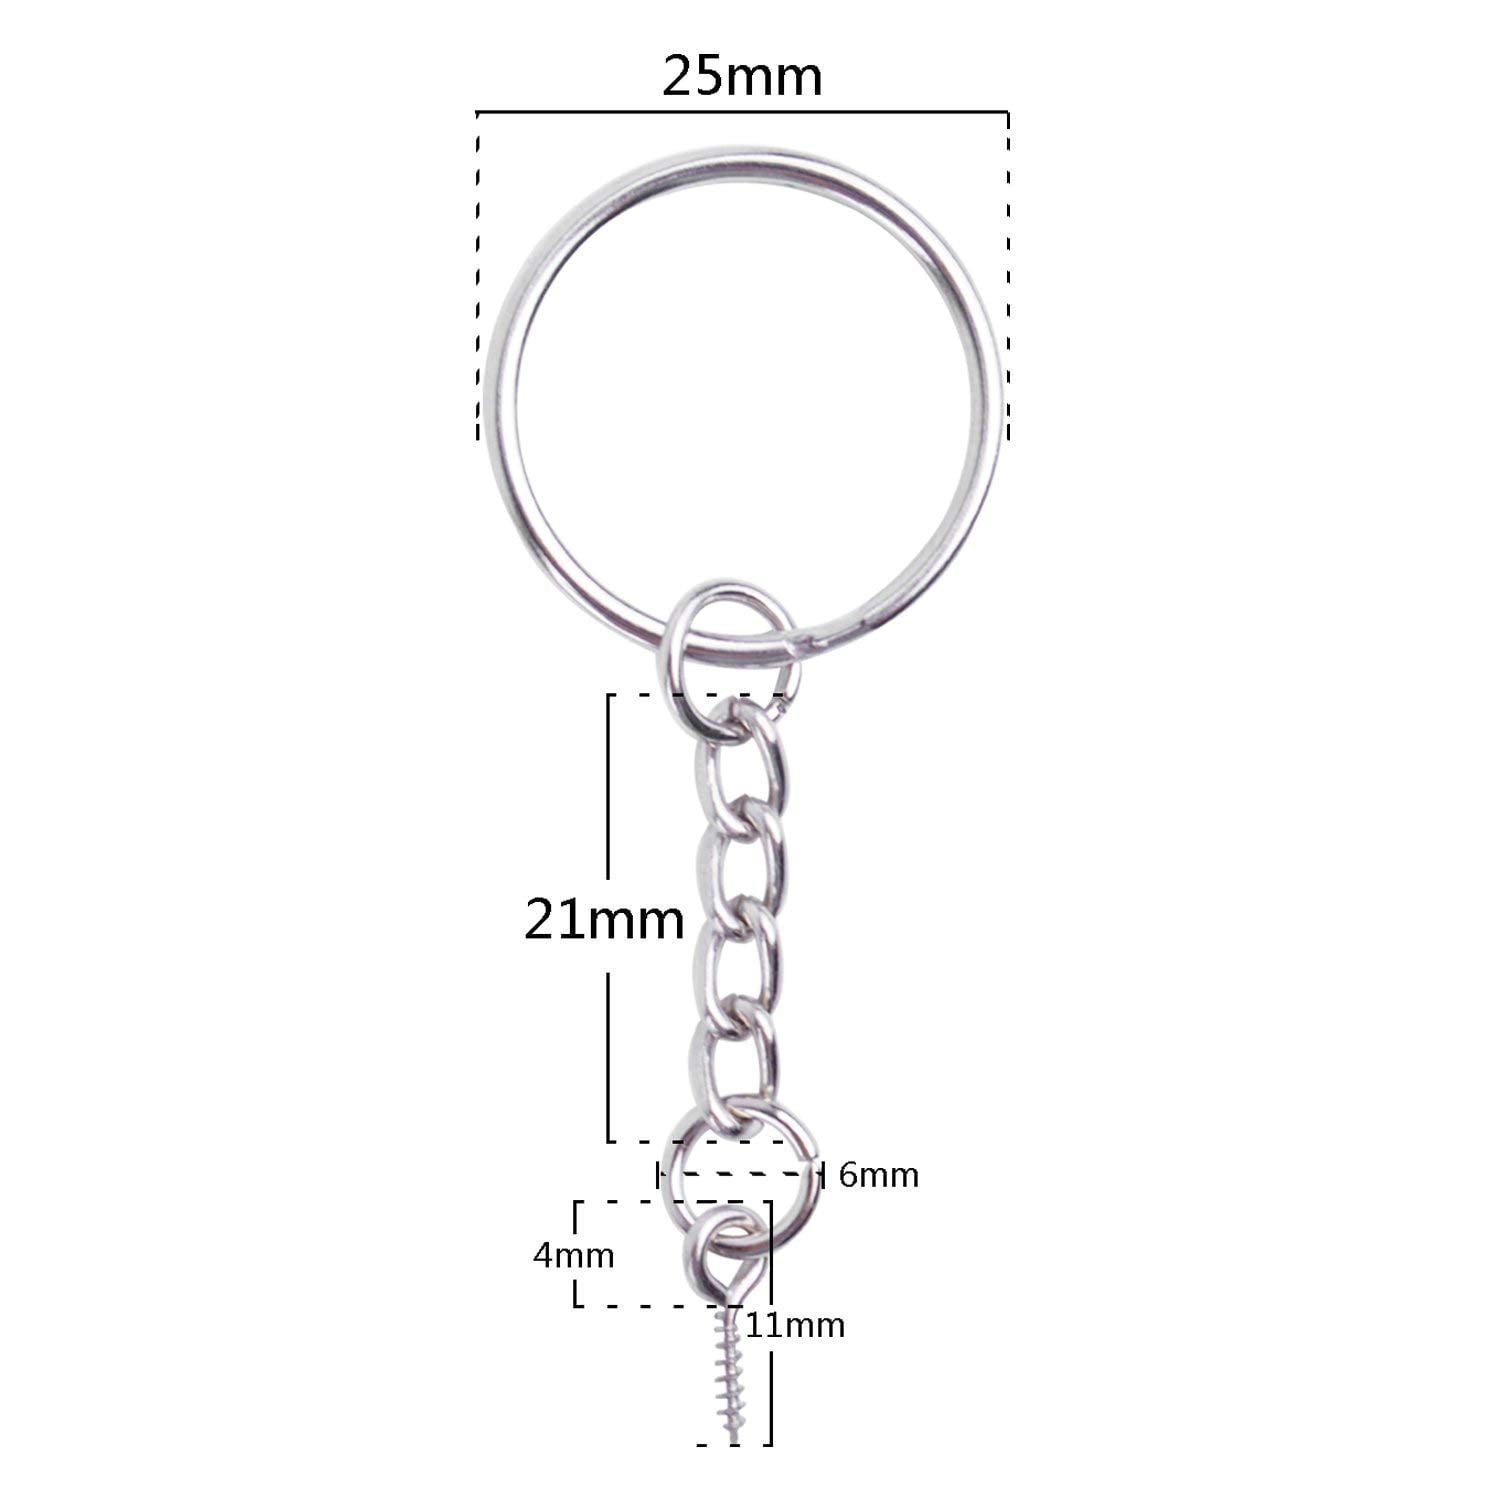 BronaGrand 50pcs 25mm Split Key Ring with Extend Chain and 12mm Screw Eye Pin for Craft Charm Making 